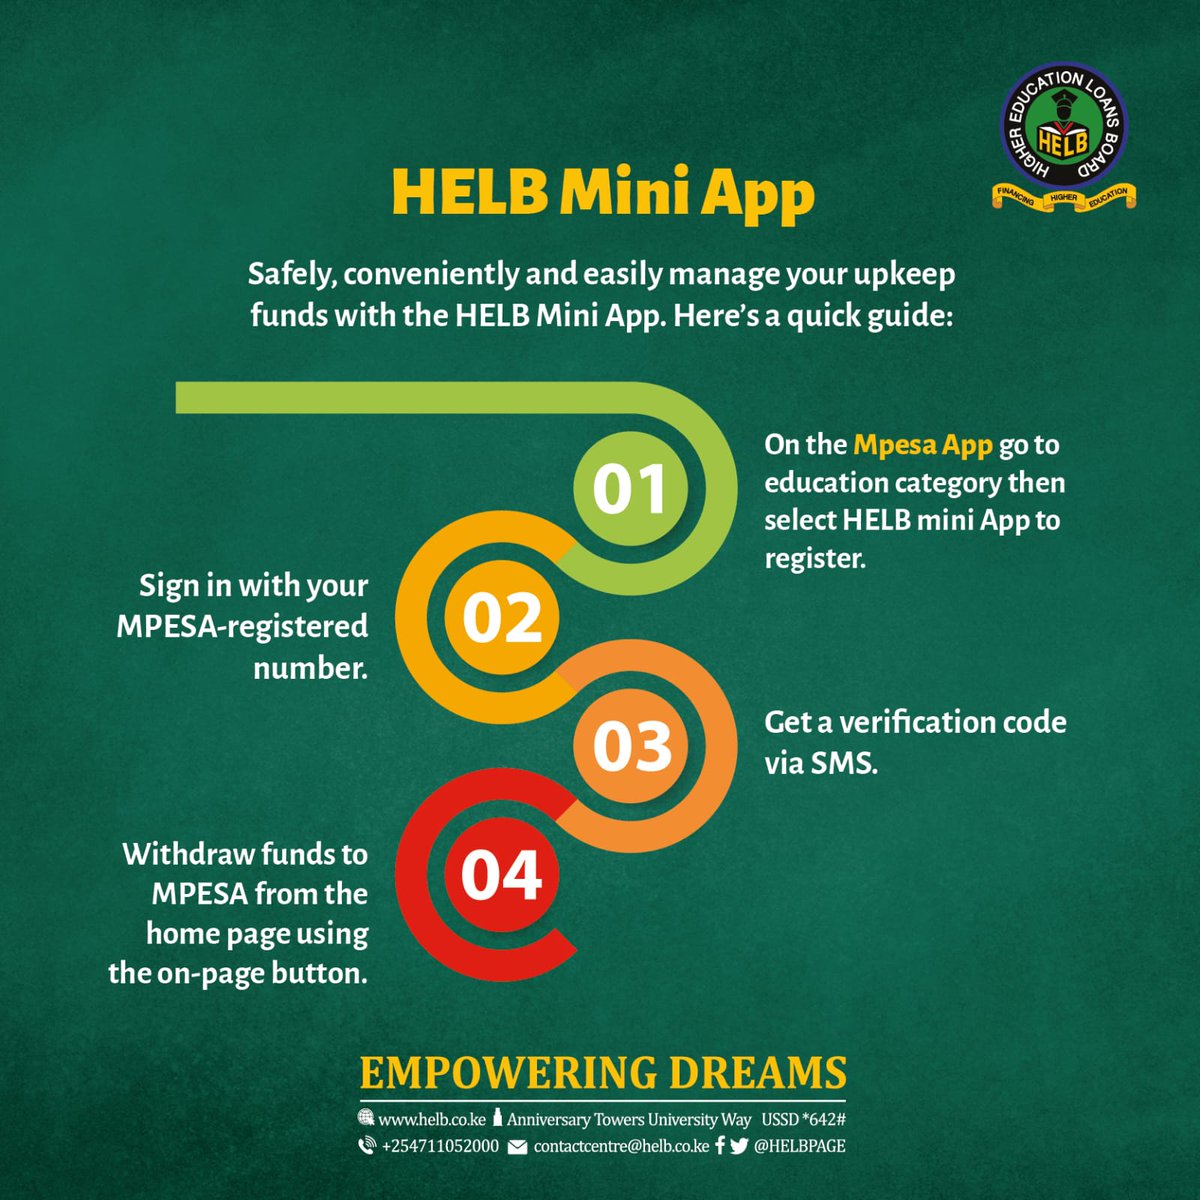 Enjoy convenient withdrawal of your upkeep funds through the HELB Mini App. Anywhere, anytime!